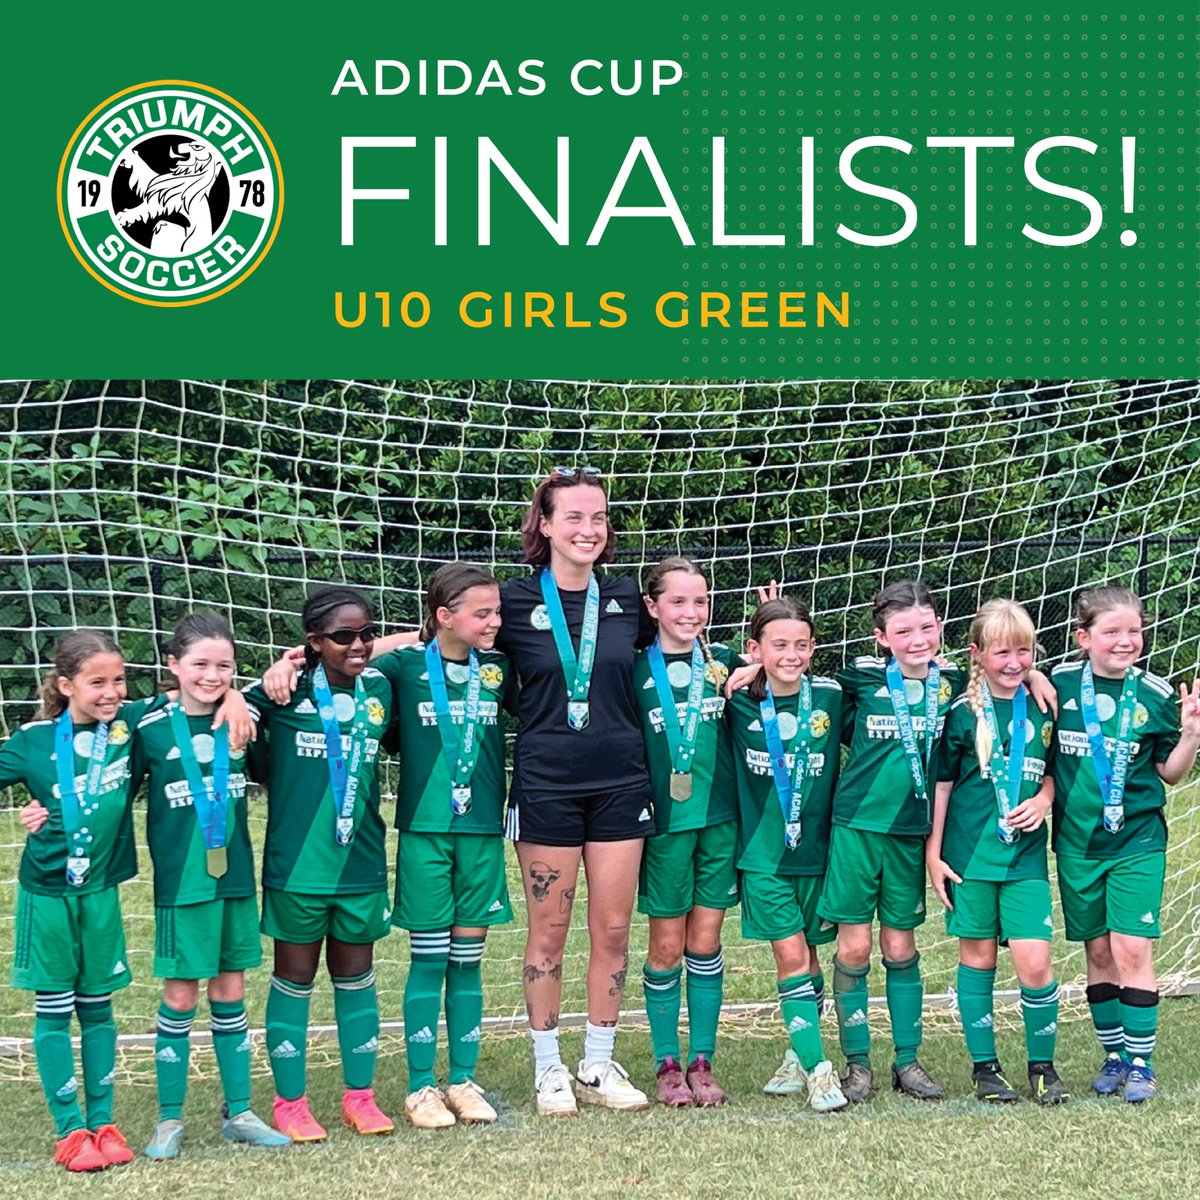 Congrats to our U12 Boys Gold team and U10 Girls Green team. Both were finalists in The Adidas Cup last weekend! #togetherwetriumph